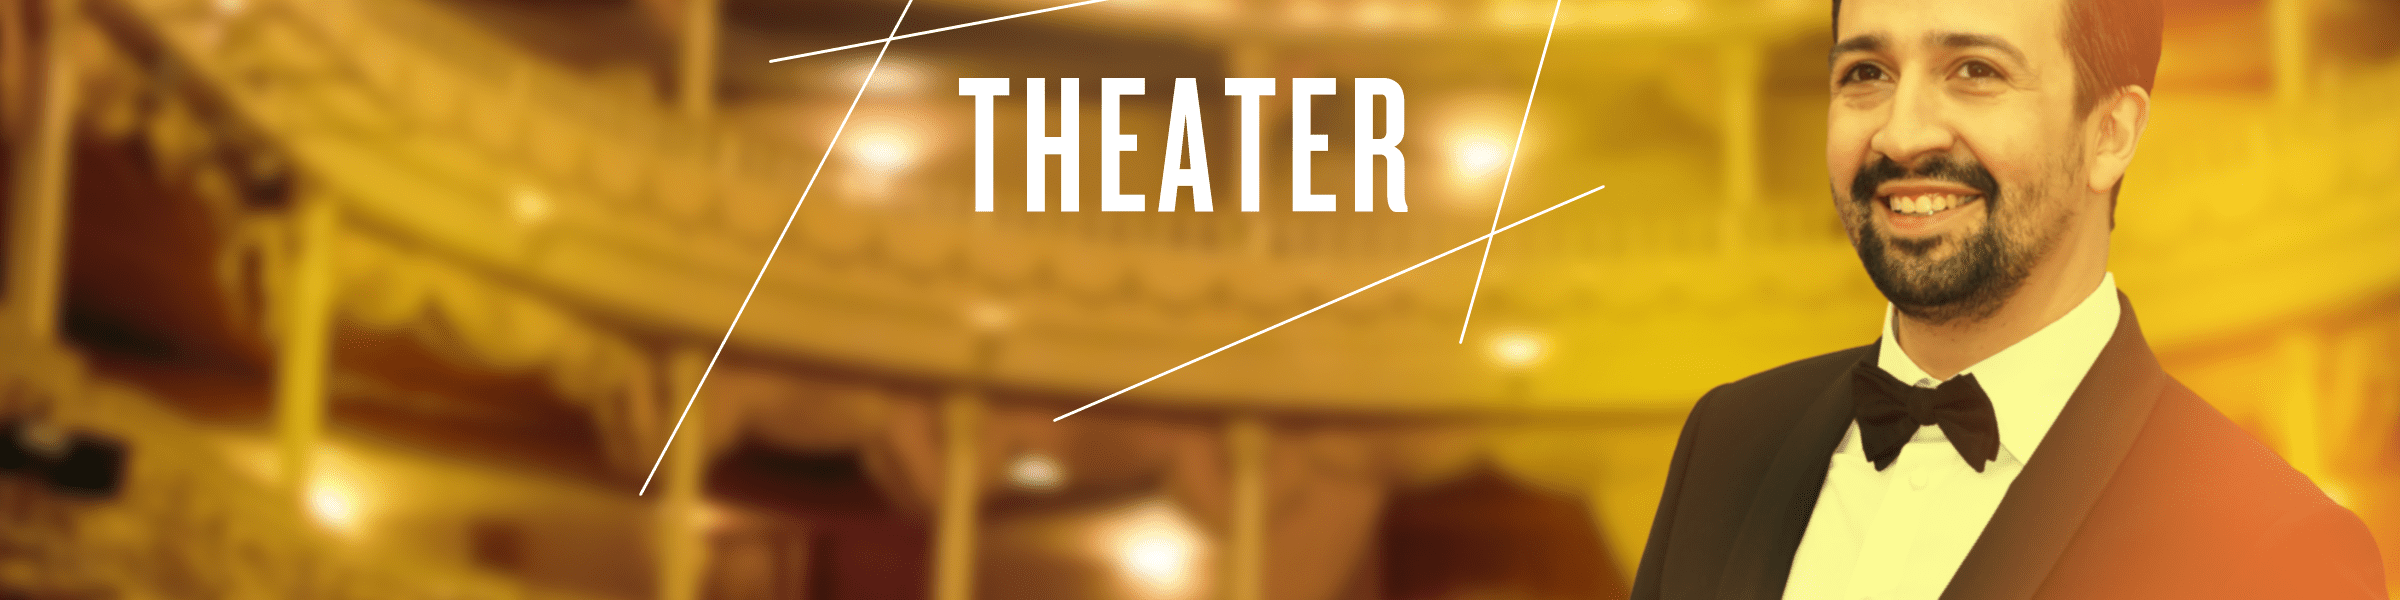 Theater Category Header image